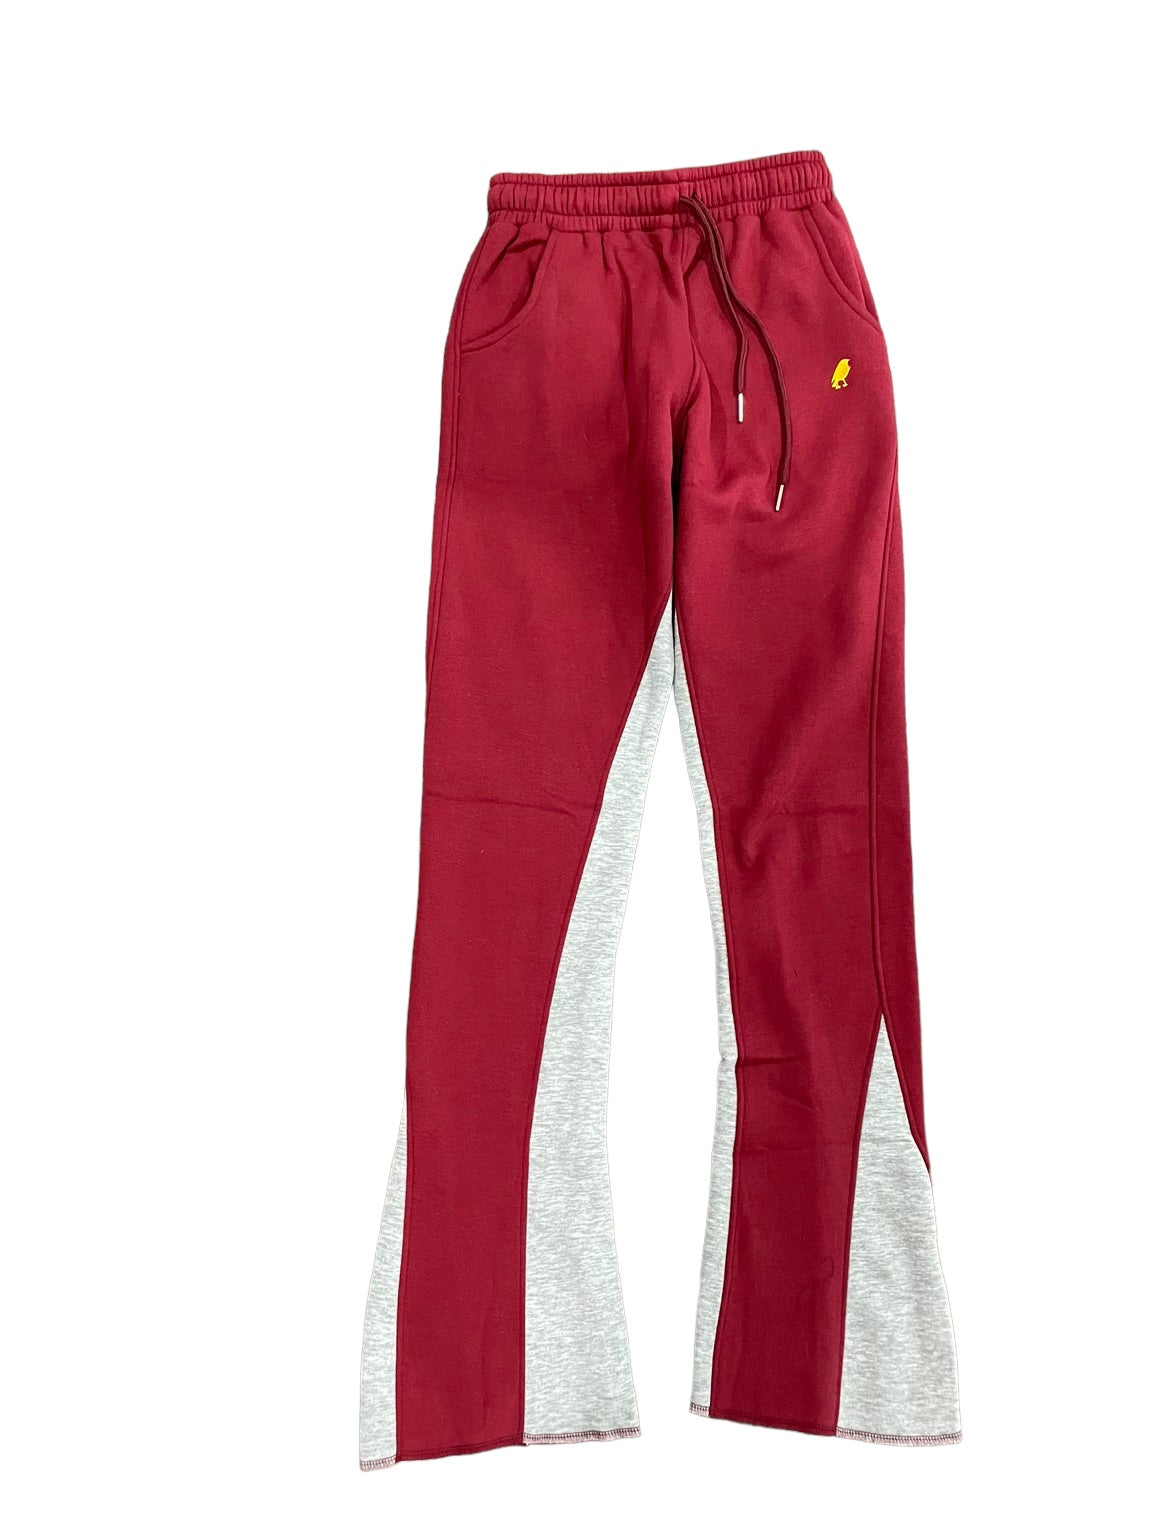 Flare sweats (Red) – Dareales Clothing